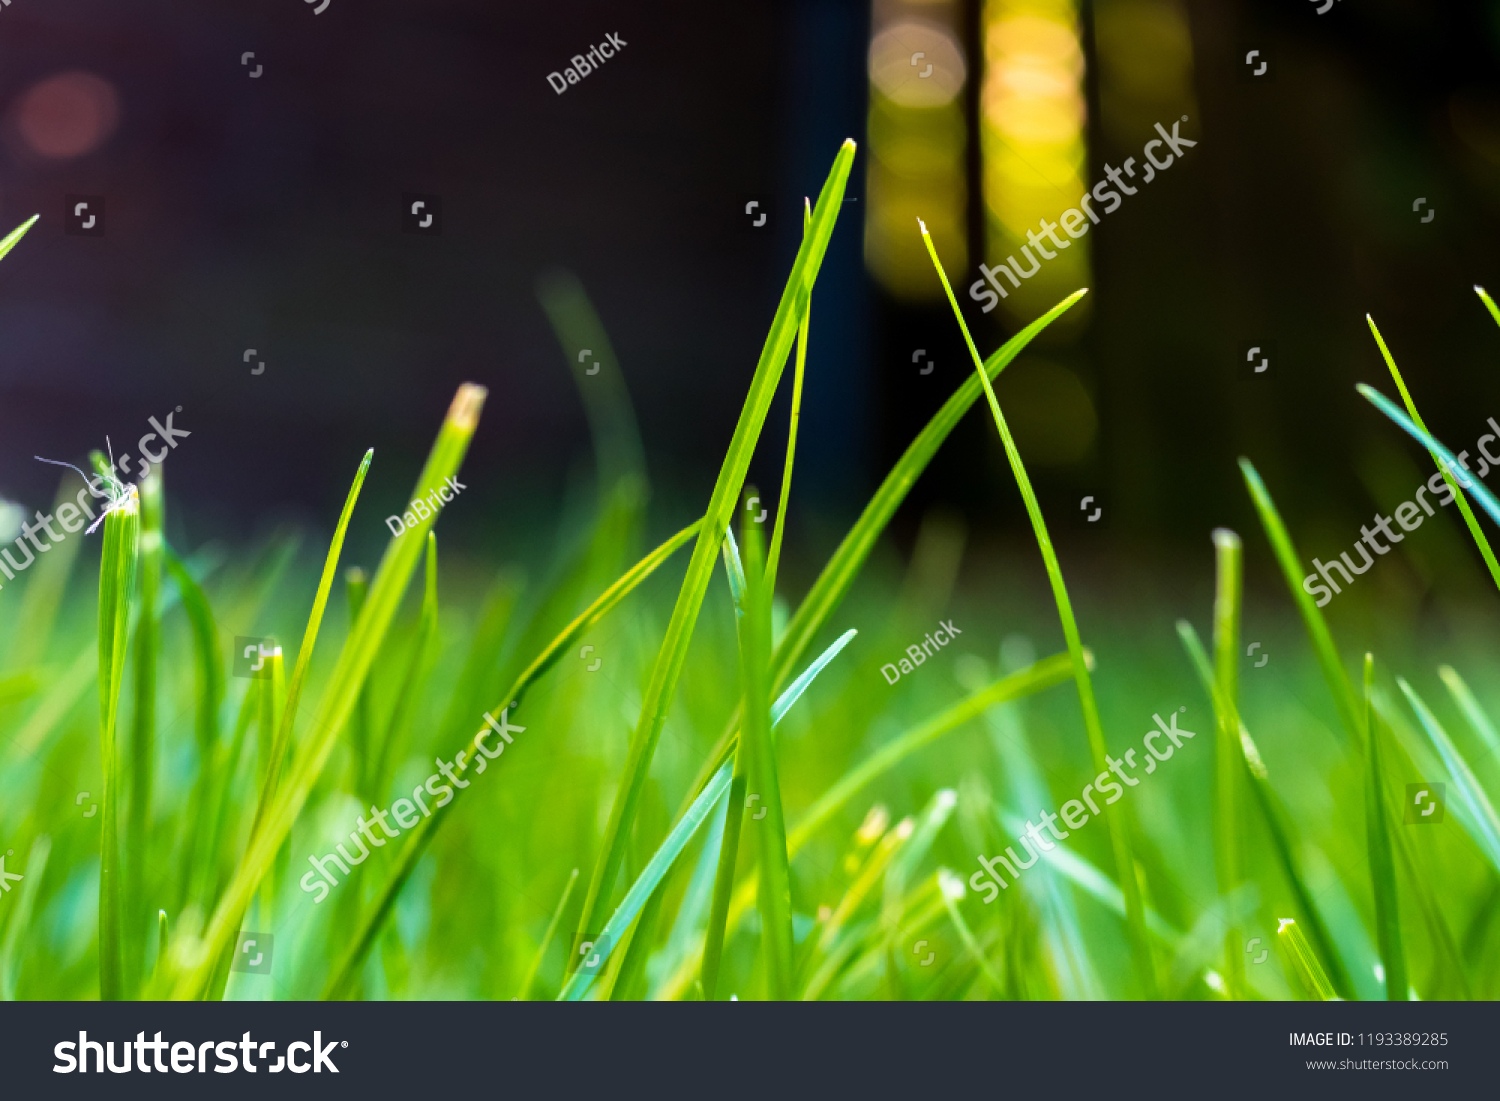 Grass in the garden, in sunlight. Closeup of a green lawn. Wet grass in the morning light. Close up macro of green grass field. Grass texture, with selective focus blur and background bokeh. #1193389285